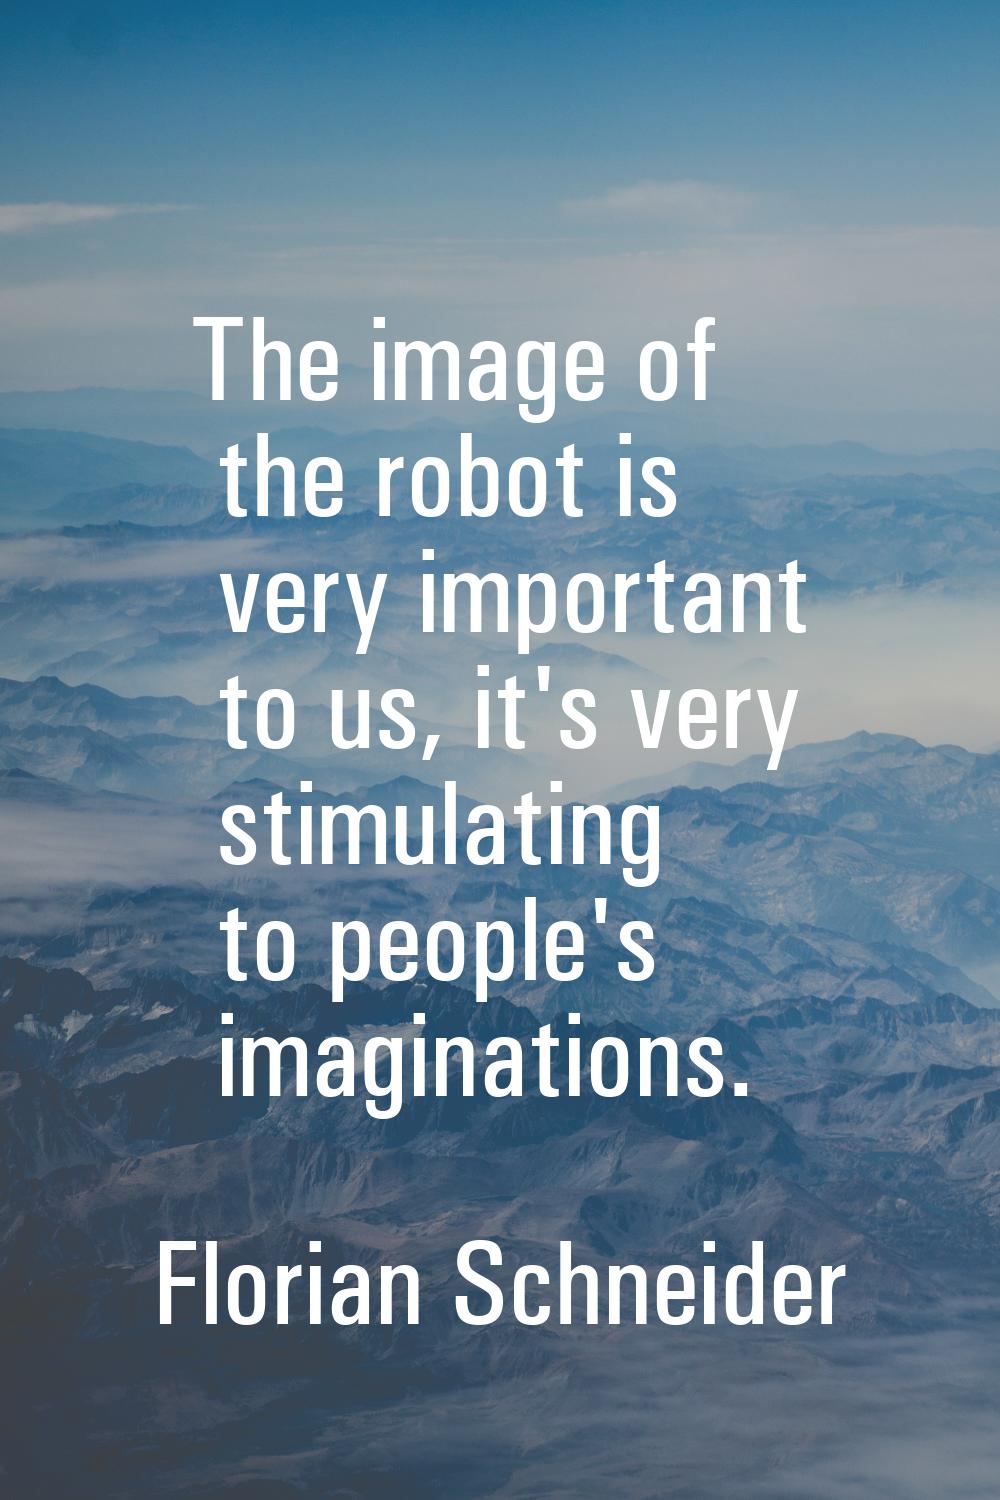 The image of the robot is very important to us, it's very stimulating to people's imaginations.